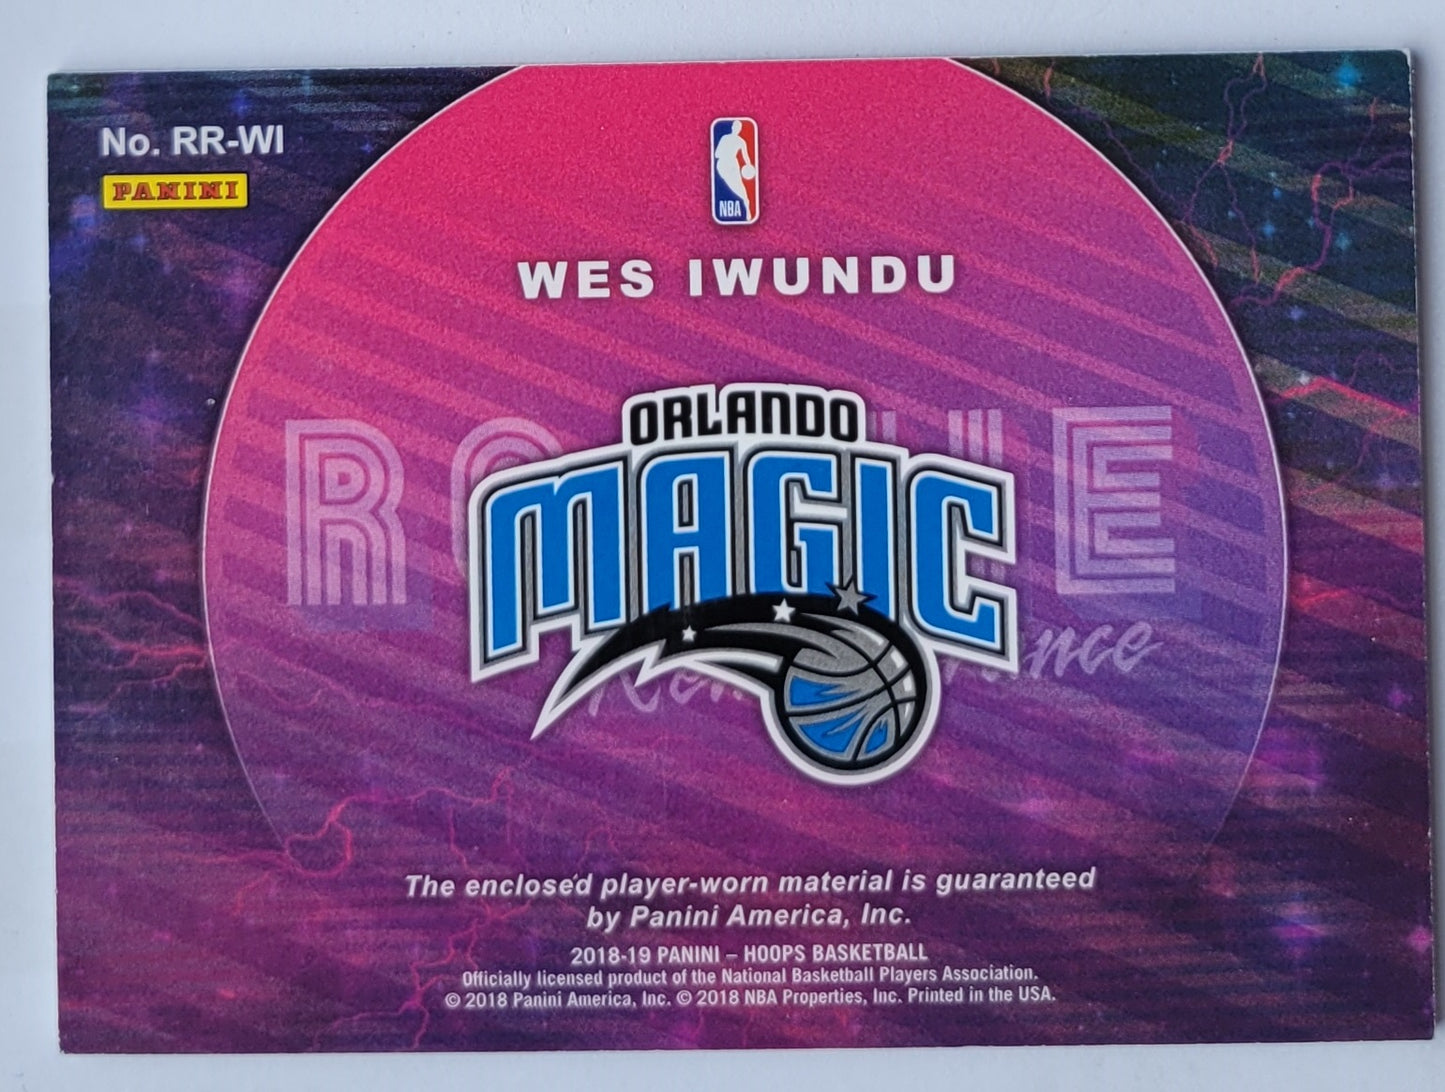 Wes Iwundu - 2018-19 Hoops Rookie Remembrance Relics #RR-WI